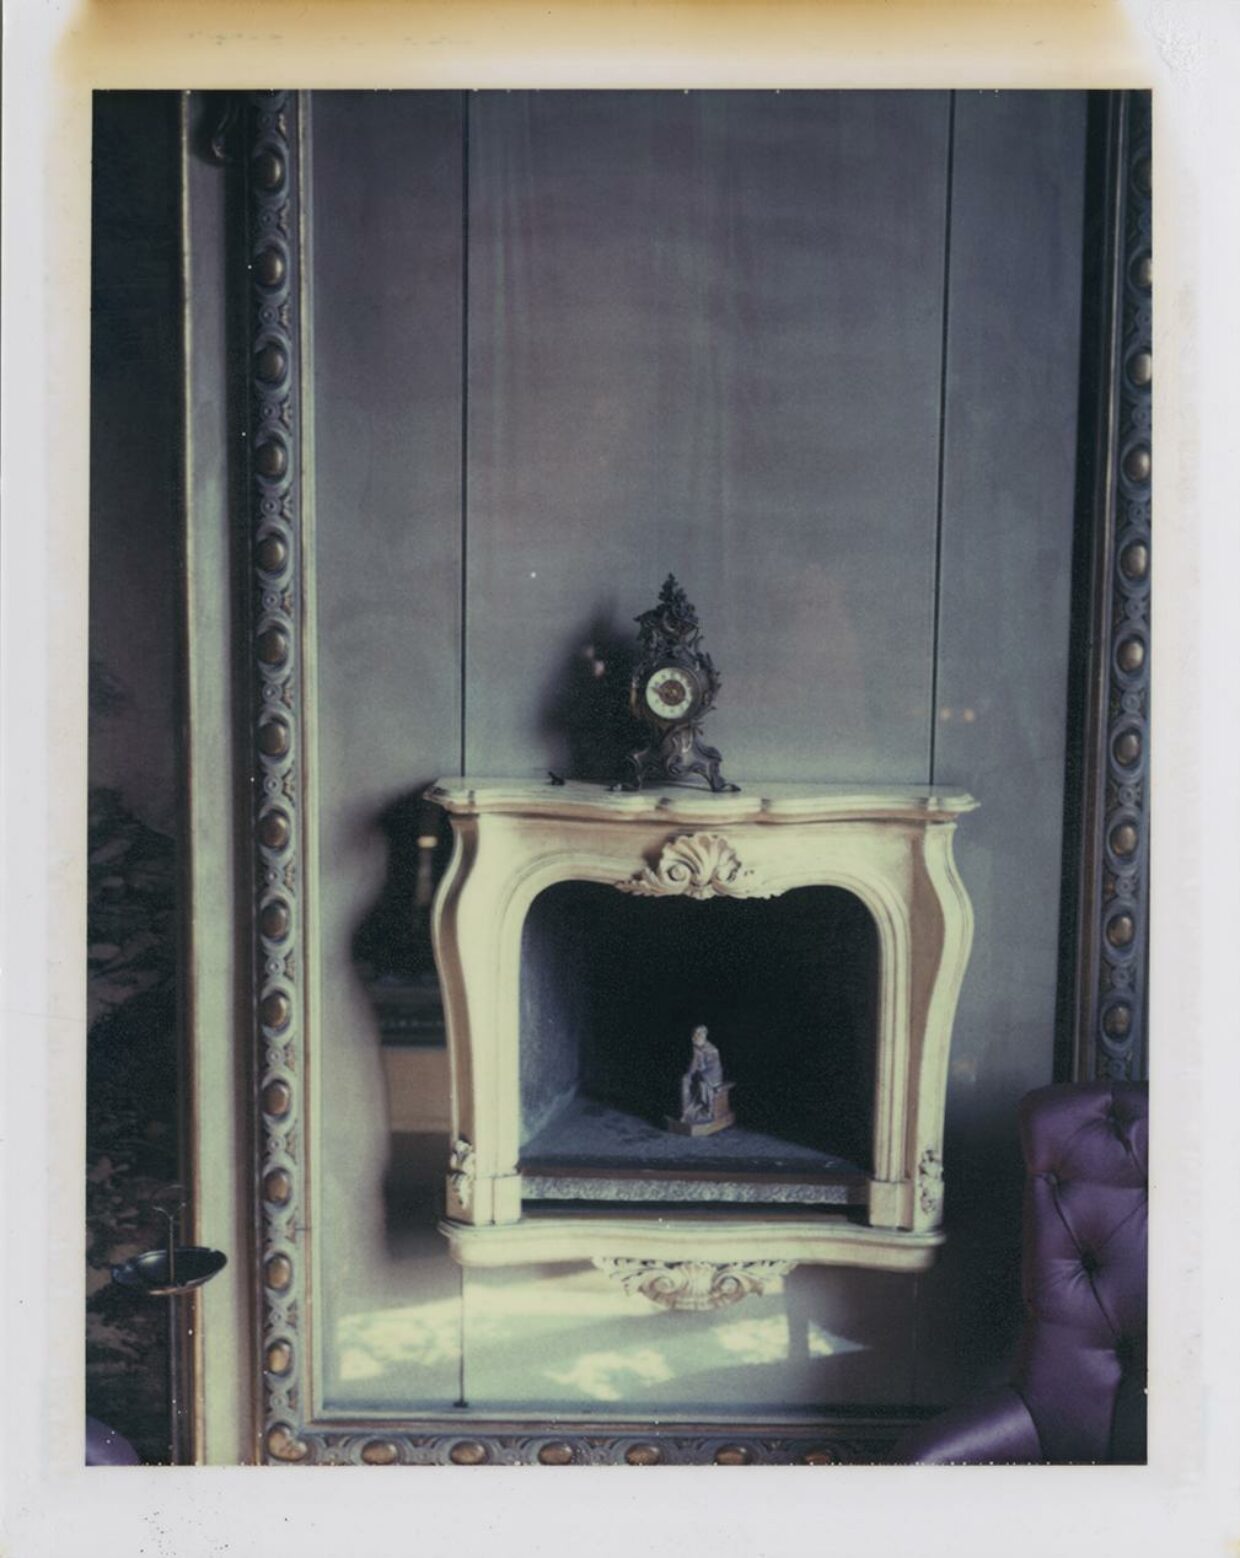 Francois Halard’s Newly Published Polaroids Open a Window onto Artists’ Homes, Including Cy Twombly’s | 6